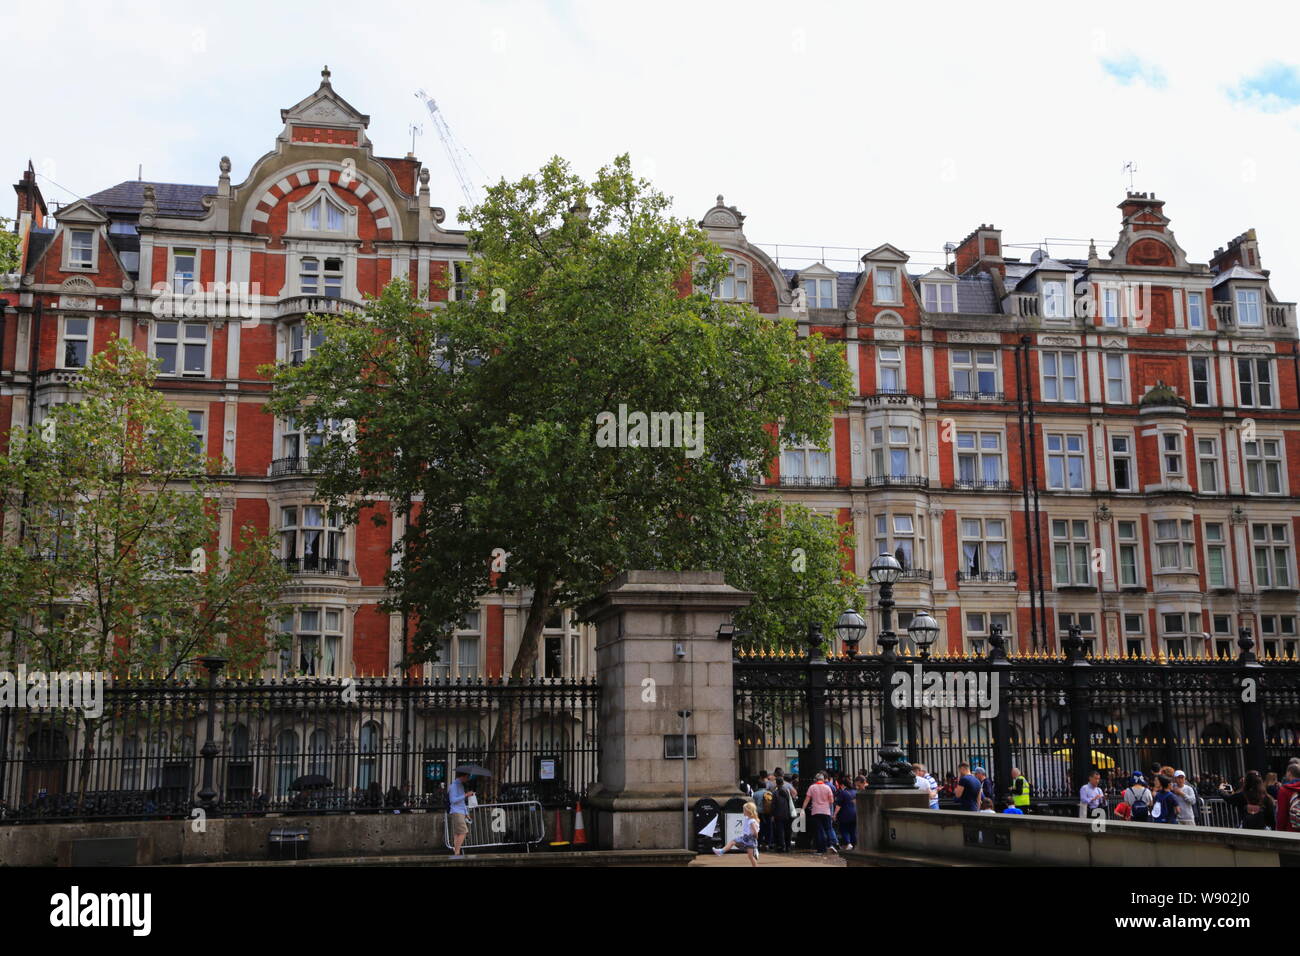 The facade of a red brick building opposite the British Museum, and people leaving the museum at the main gate in Bloomsbury, London, United Kingdom. Stock Photo